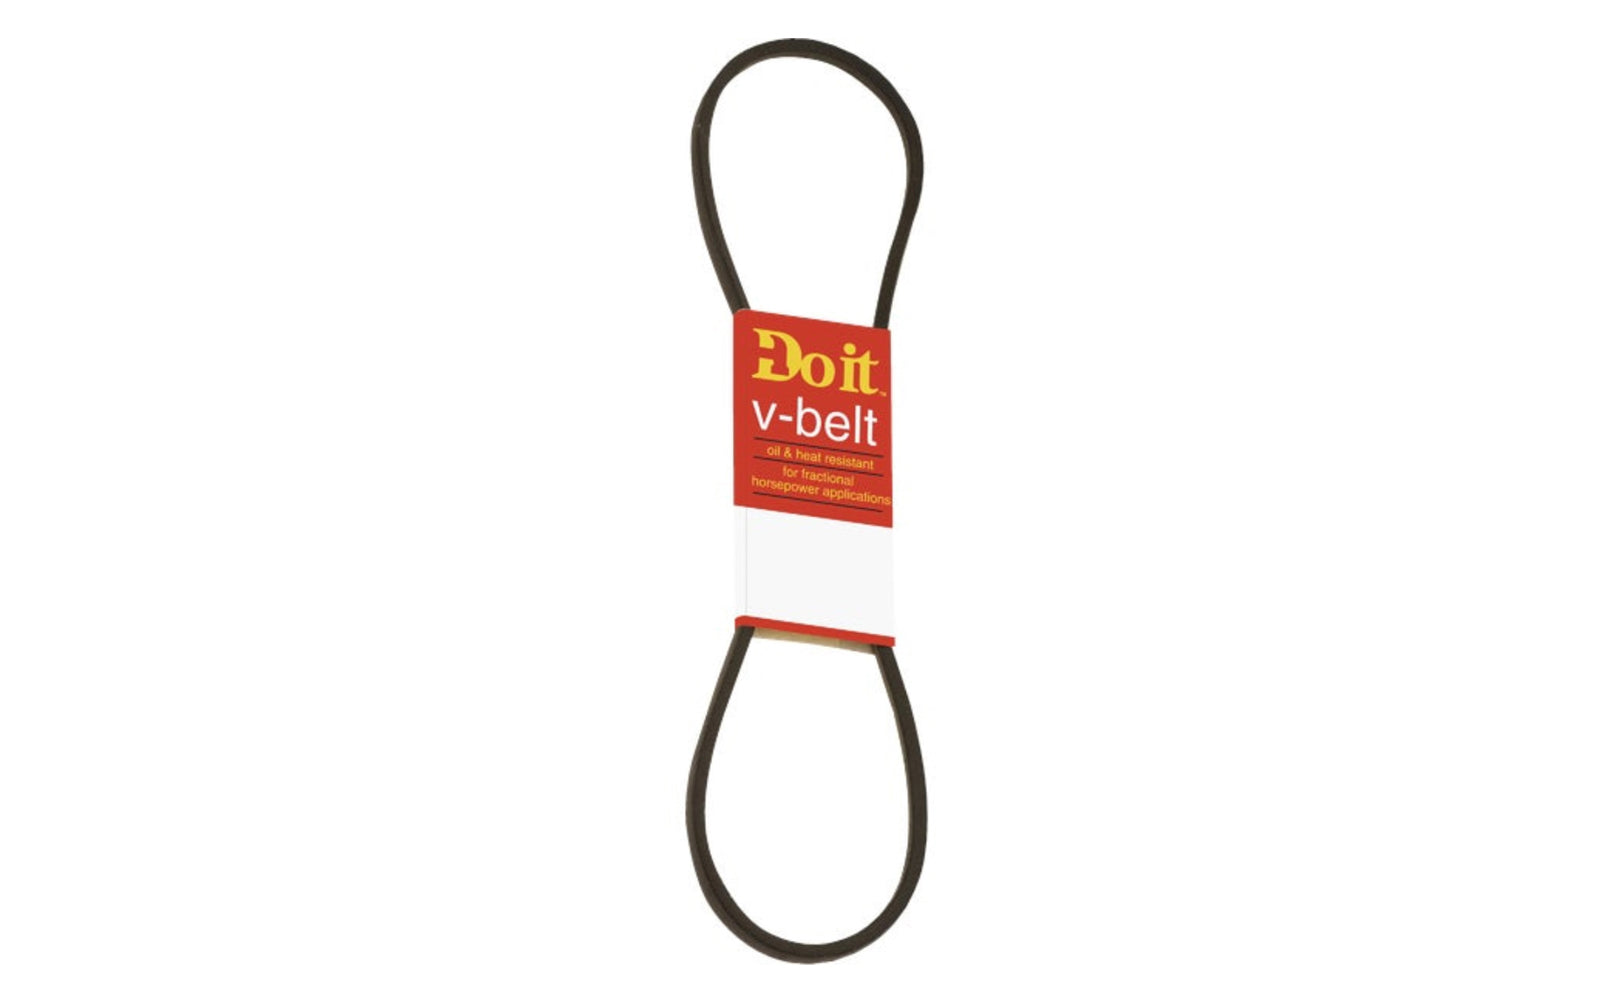 32" Long x 1/2" Width V-Belt - 4L320. Rubber V-Belt. Oil & heat resistant. Recommended for 1-3 HP (horsepower) light-duty applications. Typically the best option for electric powered applications. For refrigerators, washing machines, pumps, stokers, woodworking machines. Pulley type: A-Pulley.